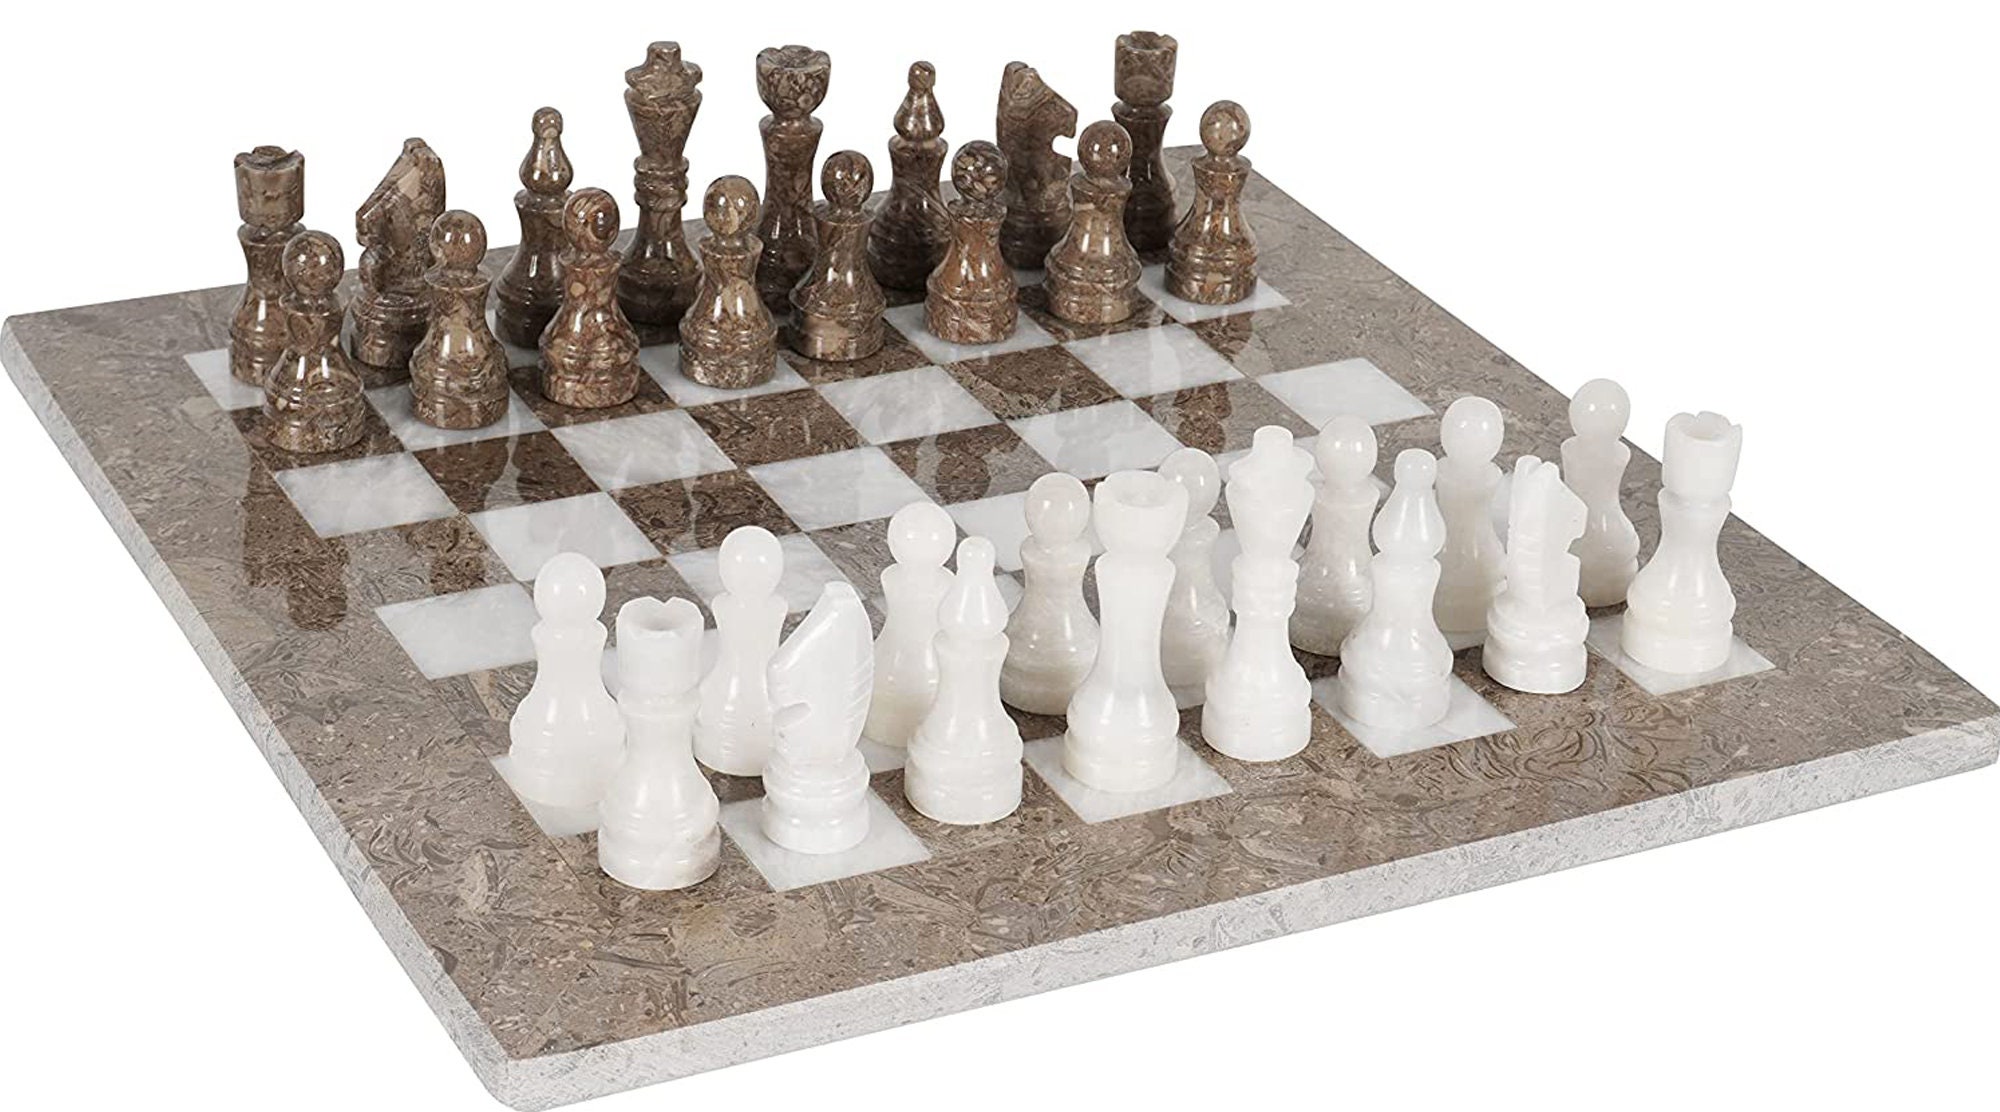  15 Inches Dark and Light Brown Weighted Chess Set - Unique Chess  Set with 32 Chess Pieces - Large Marble Chess Set Ideal for Home Décor -  Best Tournament Chess Set